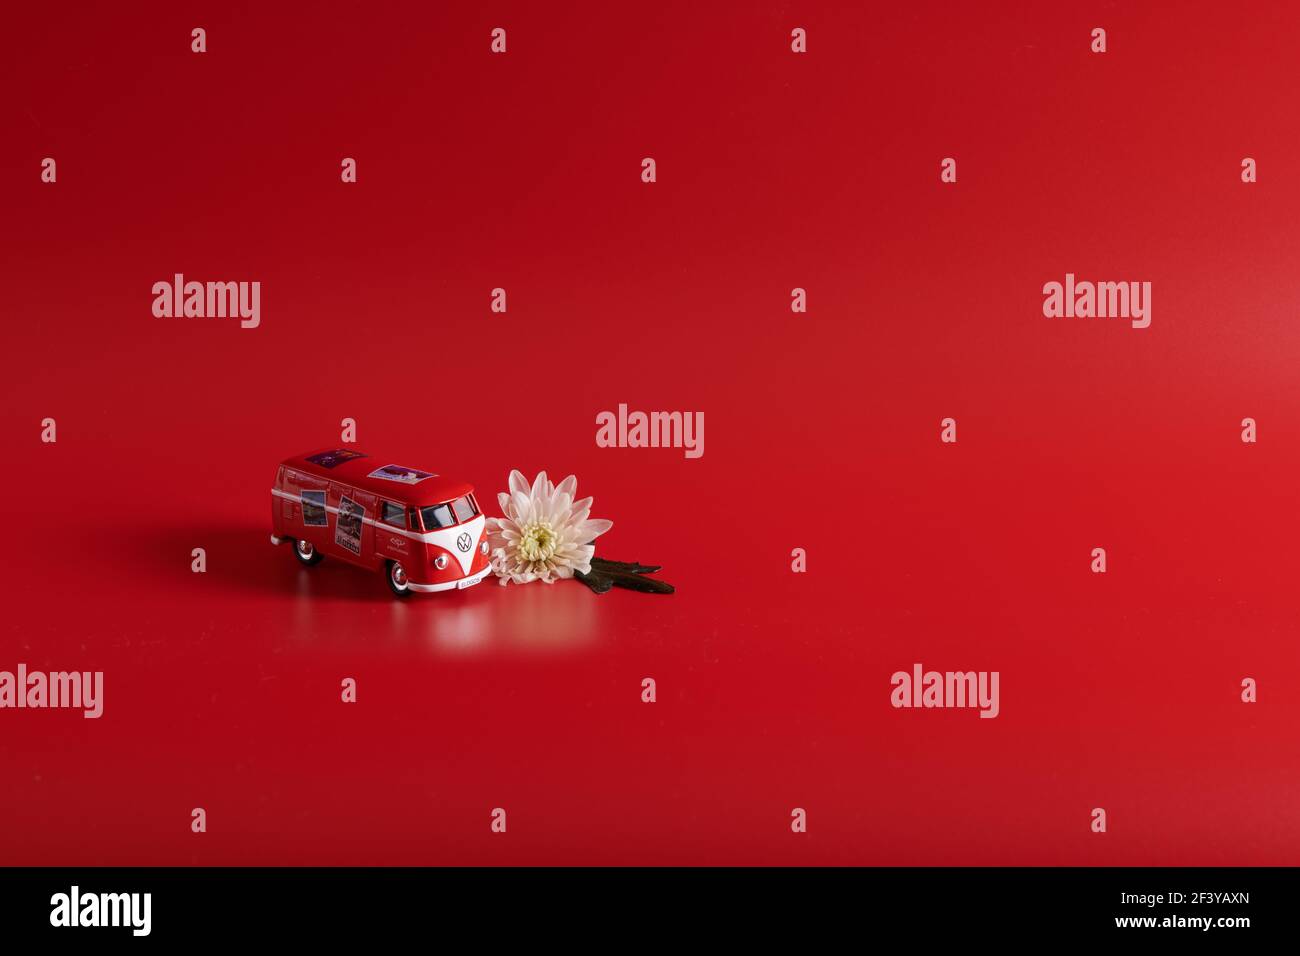 one white flower lies by a red bus on a red background Stock Photo